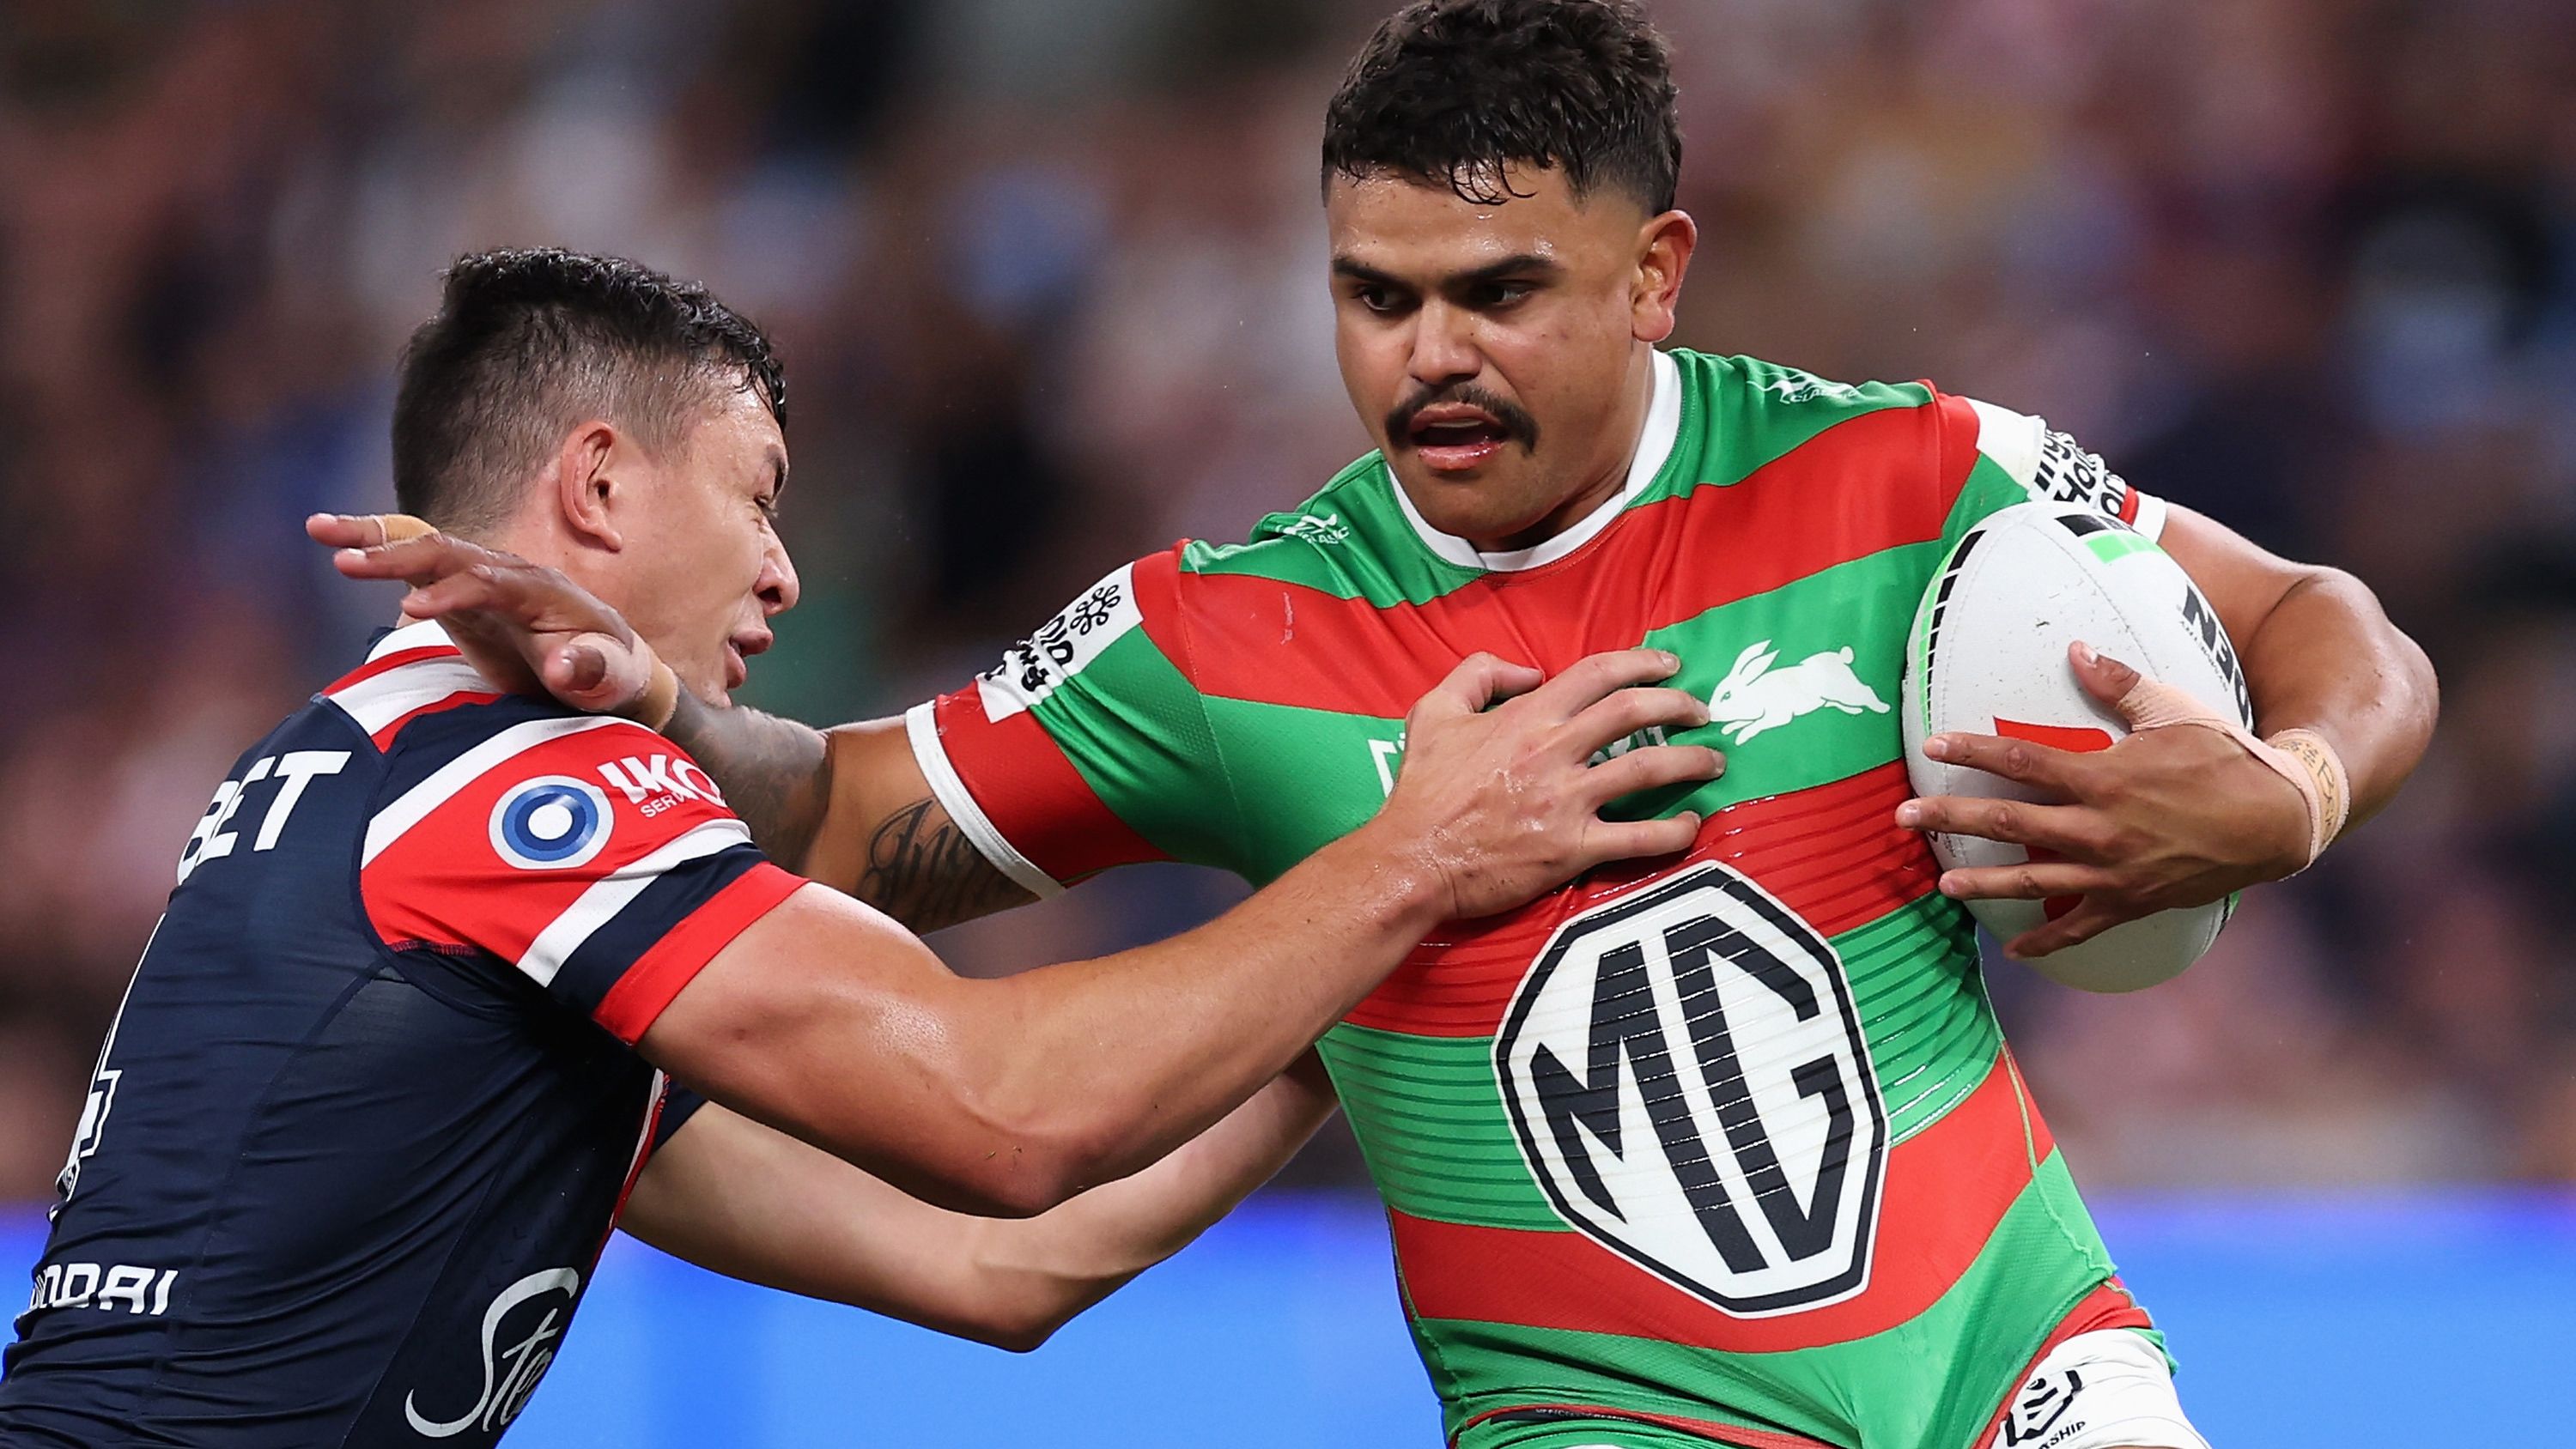 'I've got a duty of care': Rabbitohs coach hits back as teen star puts pressure on Latrell